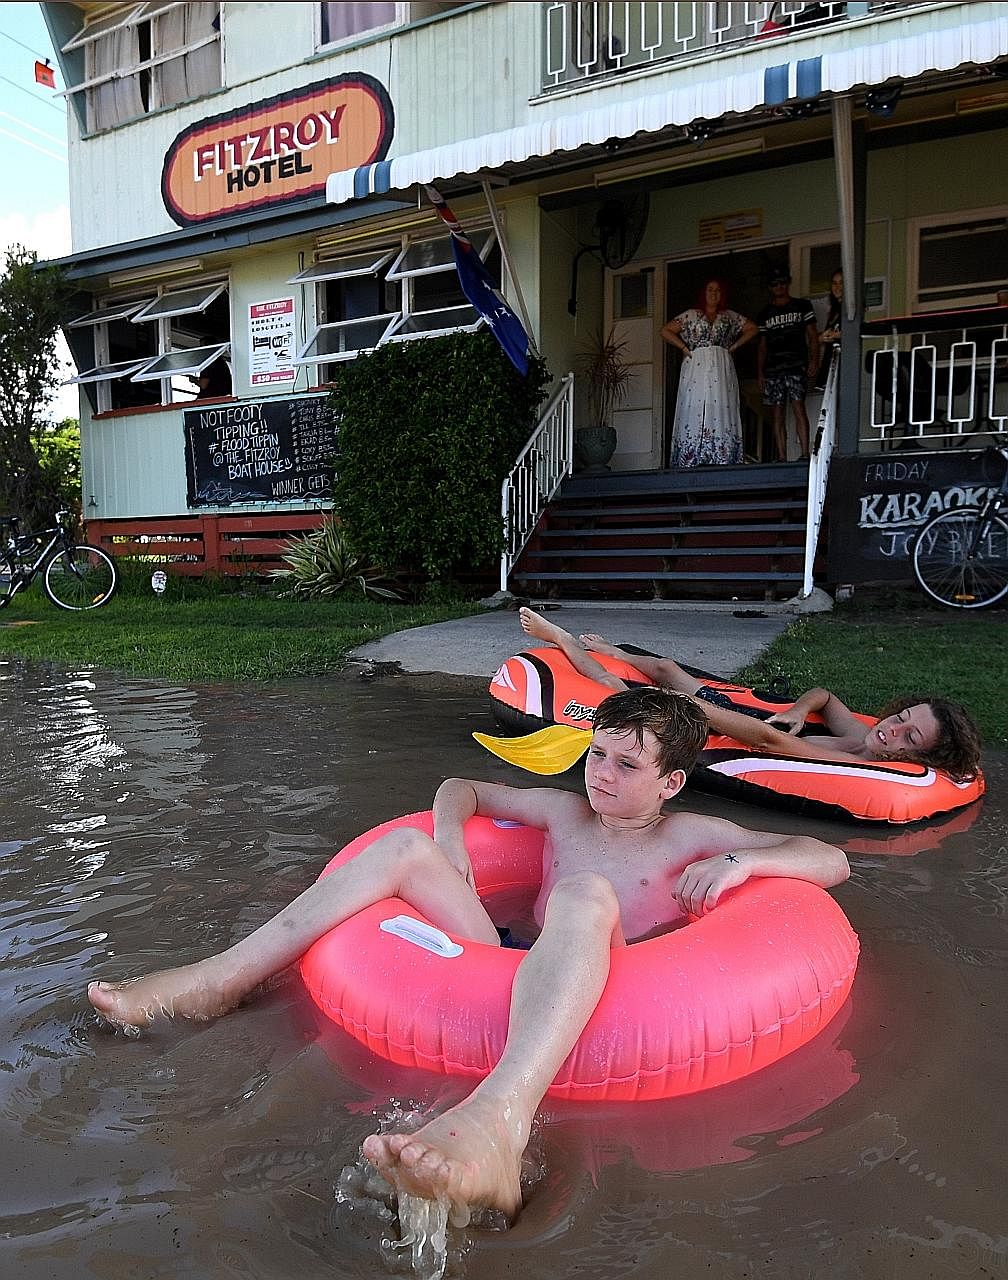 Children in Rockhampton, Queensland, playing in flood waters left in the wake of Cyclone Debbie yesterday. The disaster caused billions of dollars in damage to various sectors in Australia.